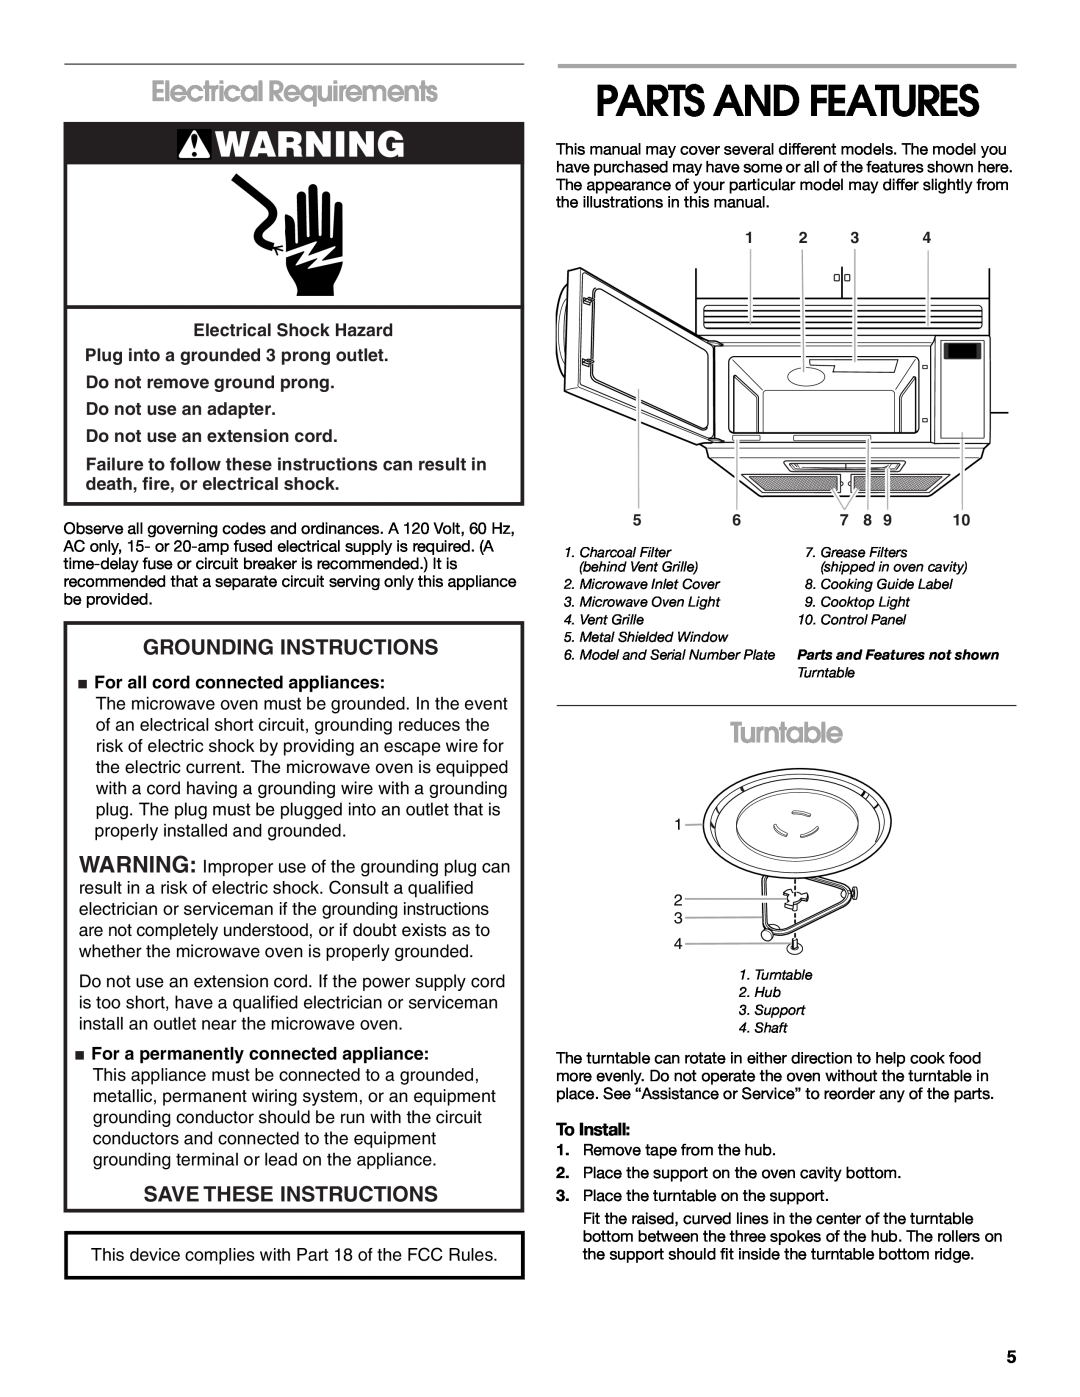 Whirlpool MHE14XM Parts And Features, Electrical Requirements, Turntable, Grounding Instructions, Save These Instructions 